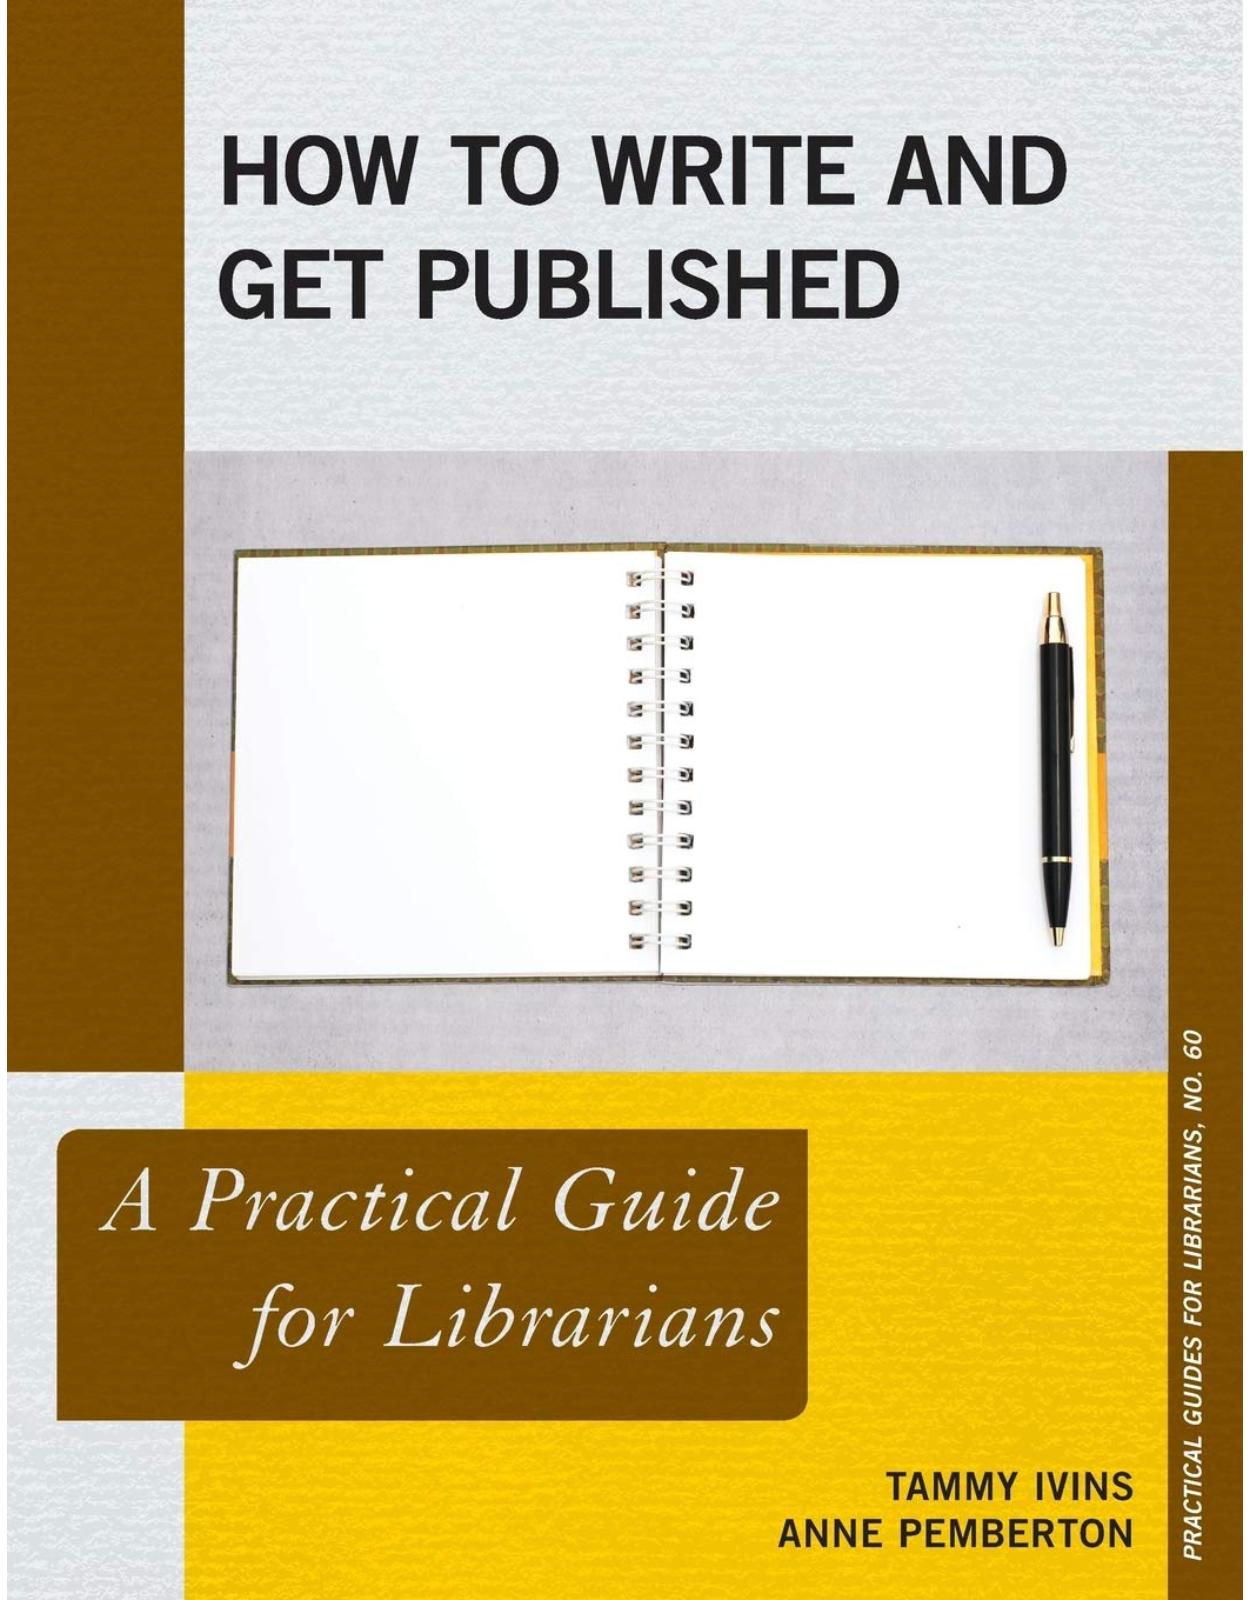 How to Write and Get Published A Practical Guide for Librarians